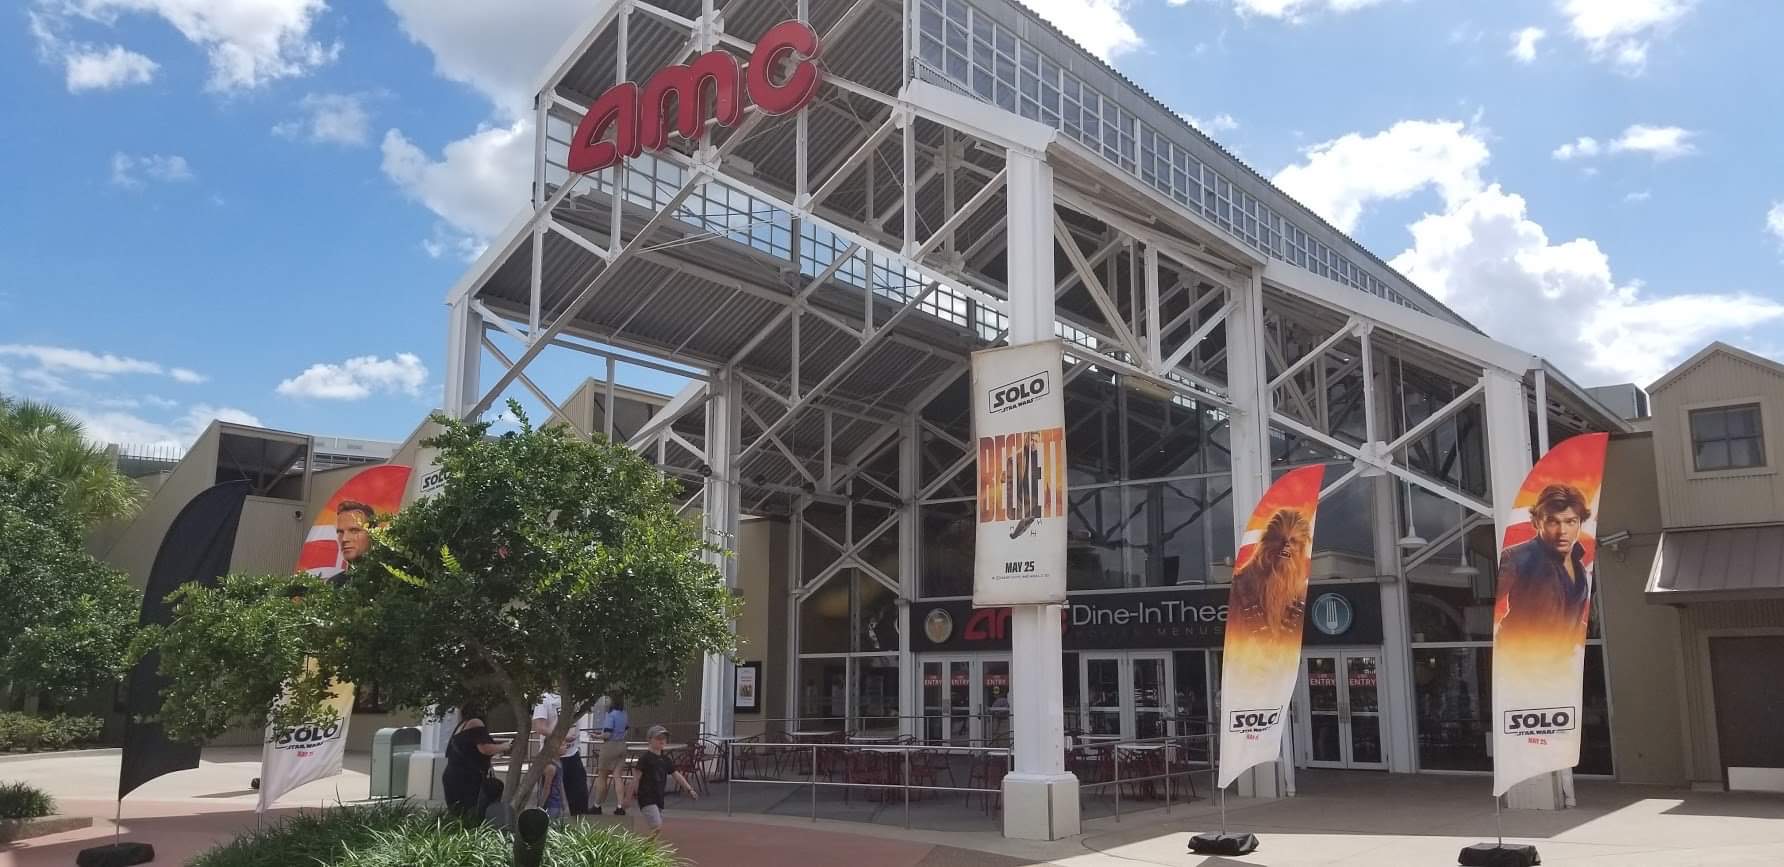 AMC delays reopening to July 30, 2020